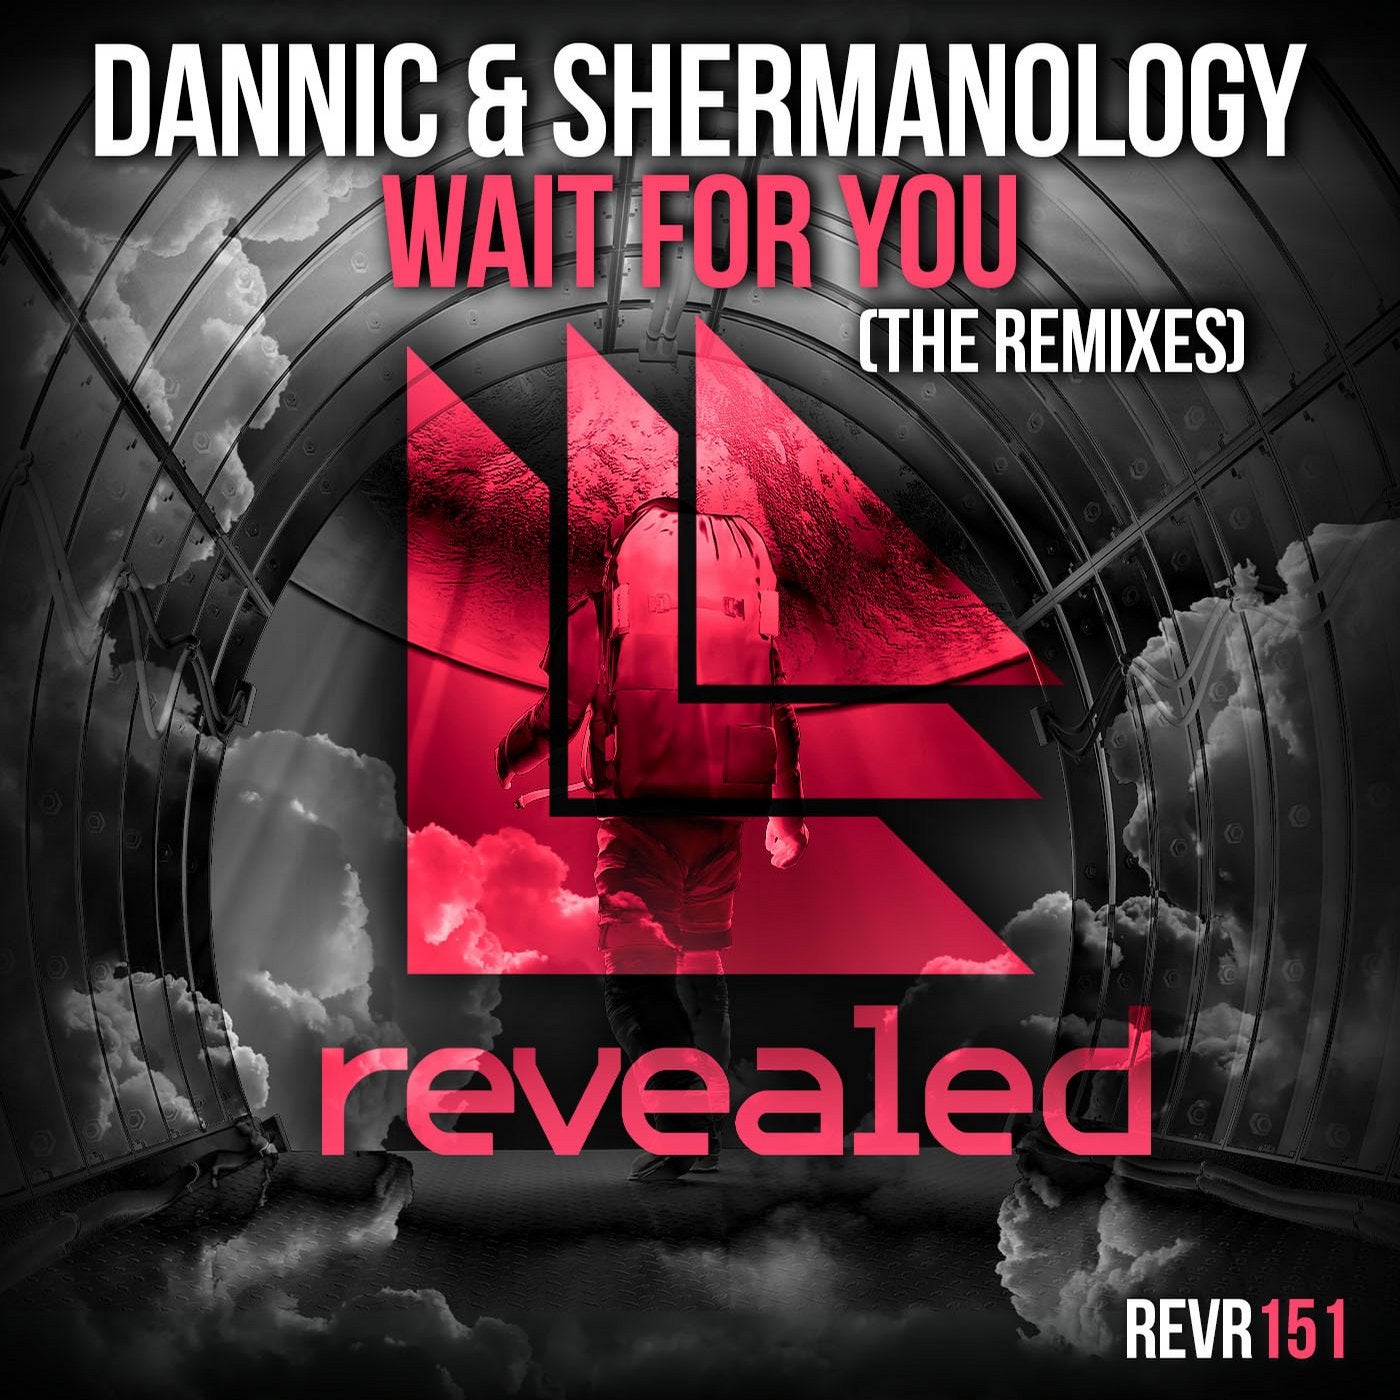 Wait For You - The Remixes